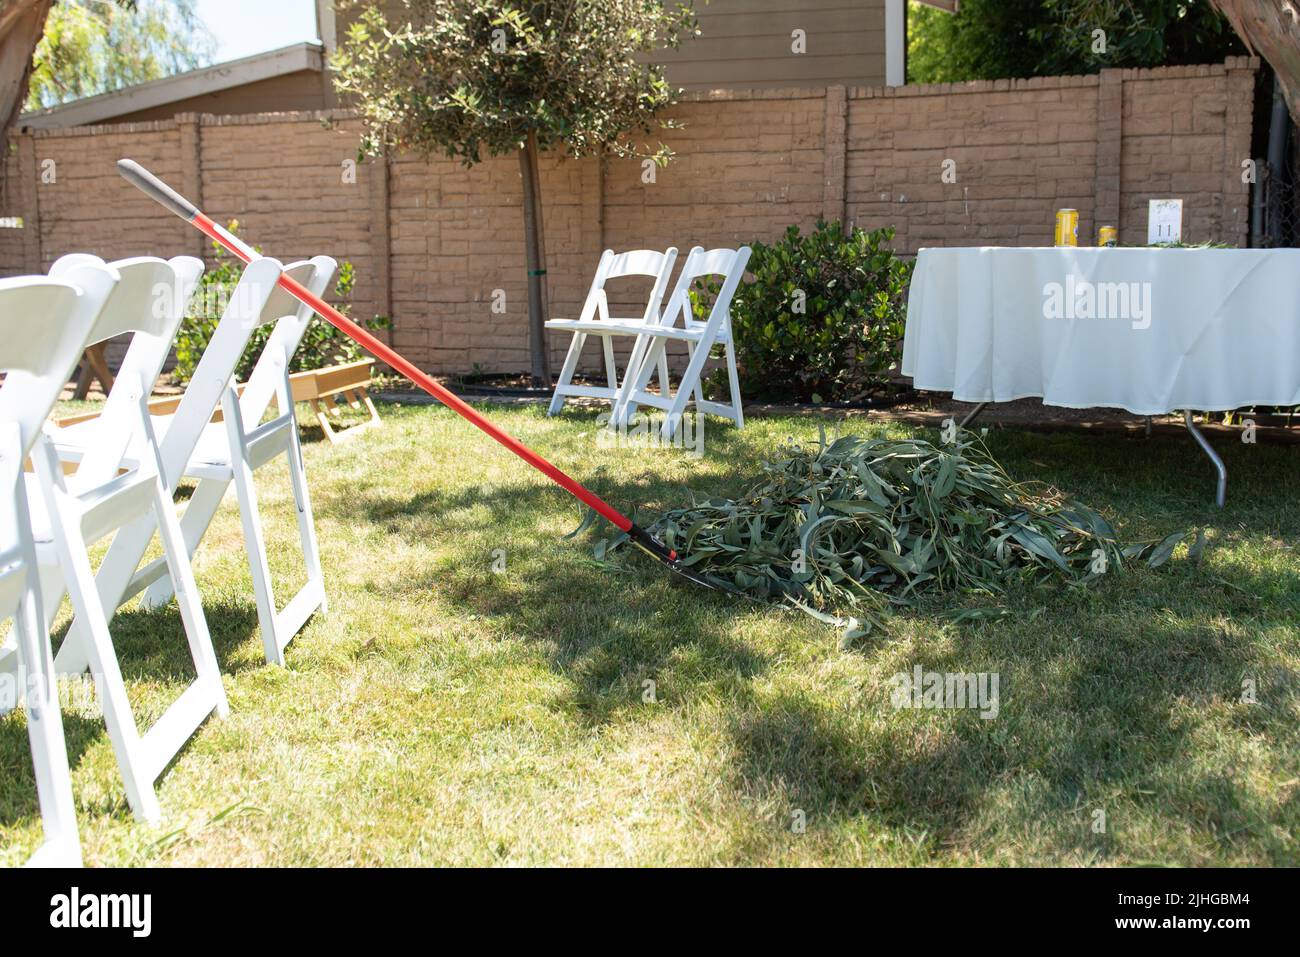 Backyard venue needs some leaves raked to clean up the grass before the party. Stock Photo